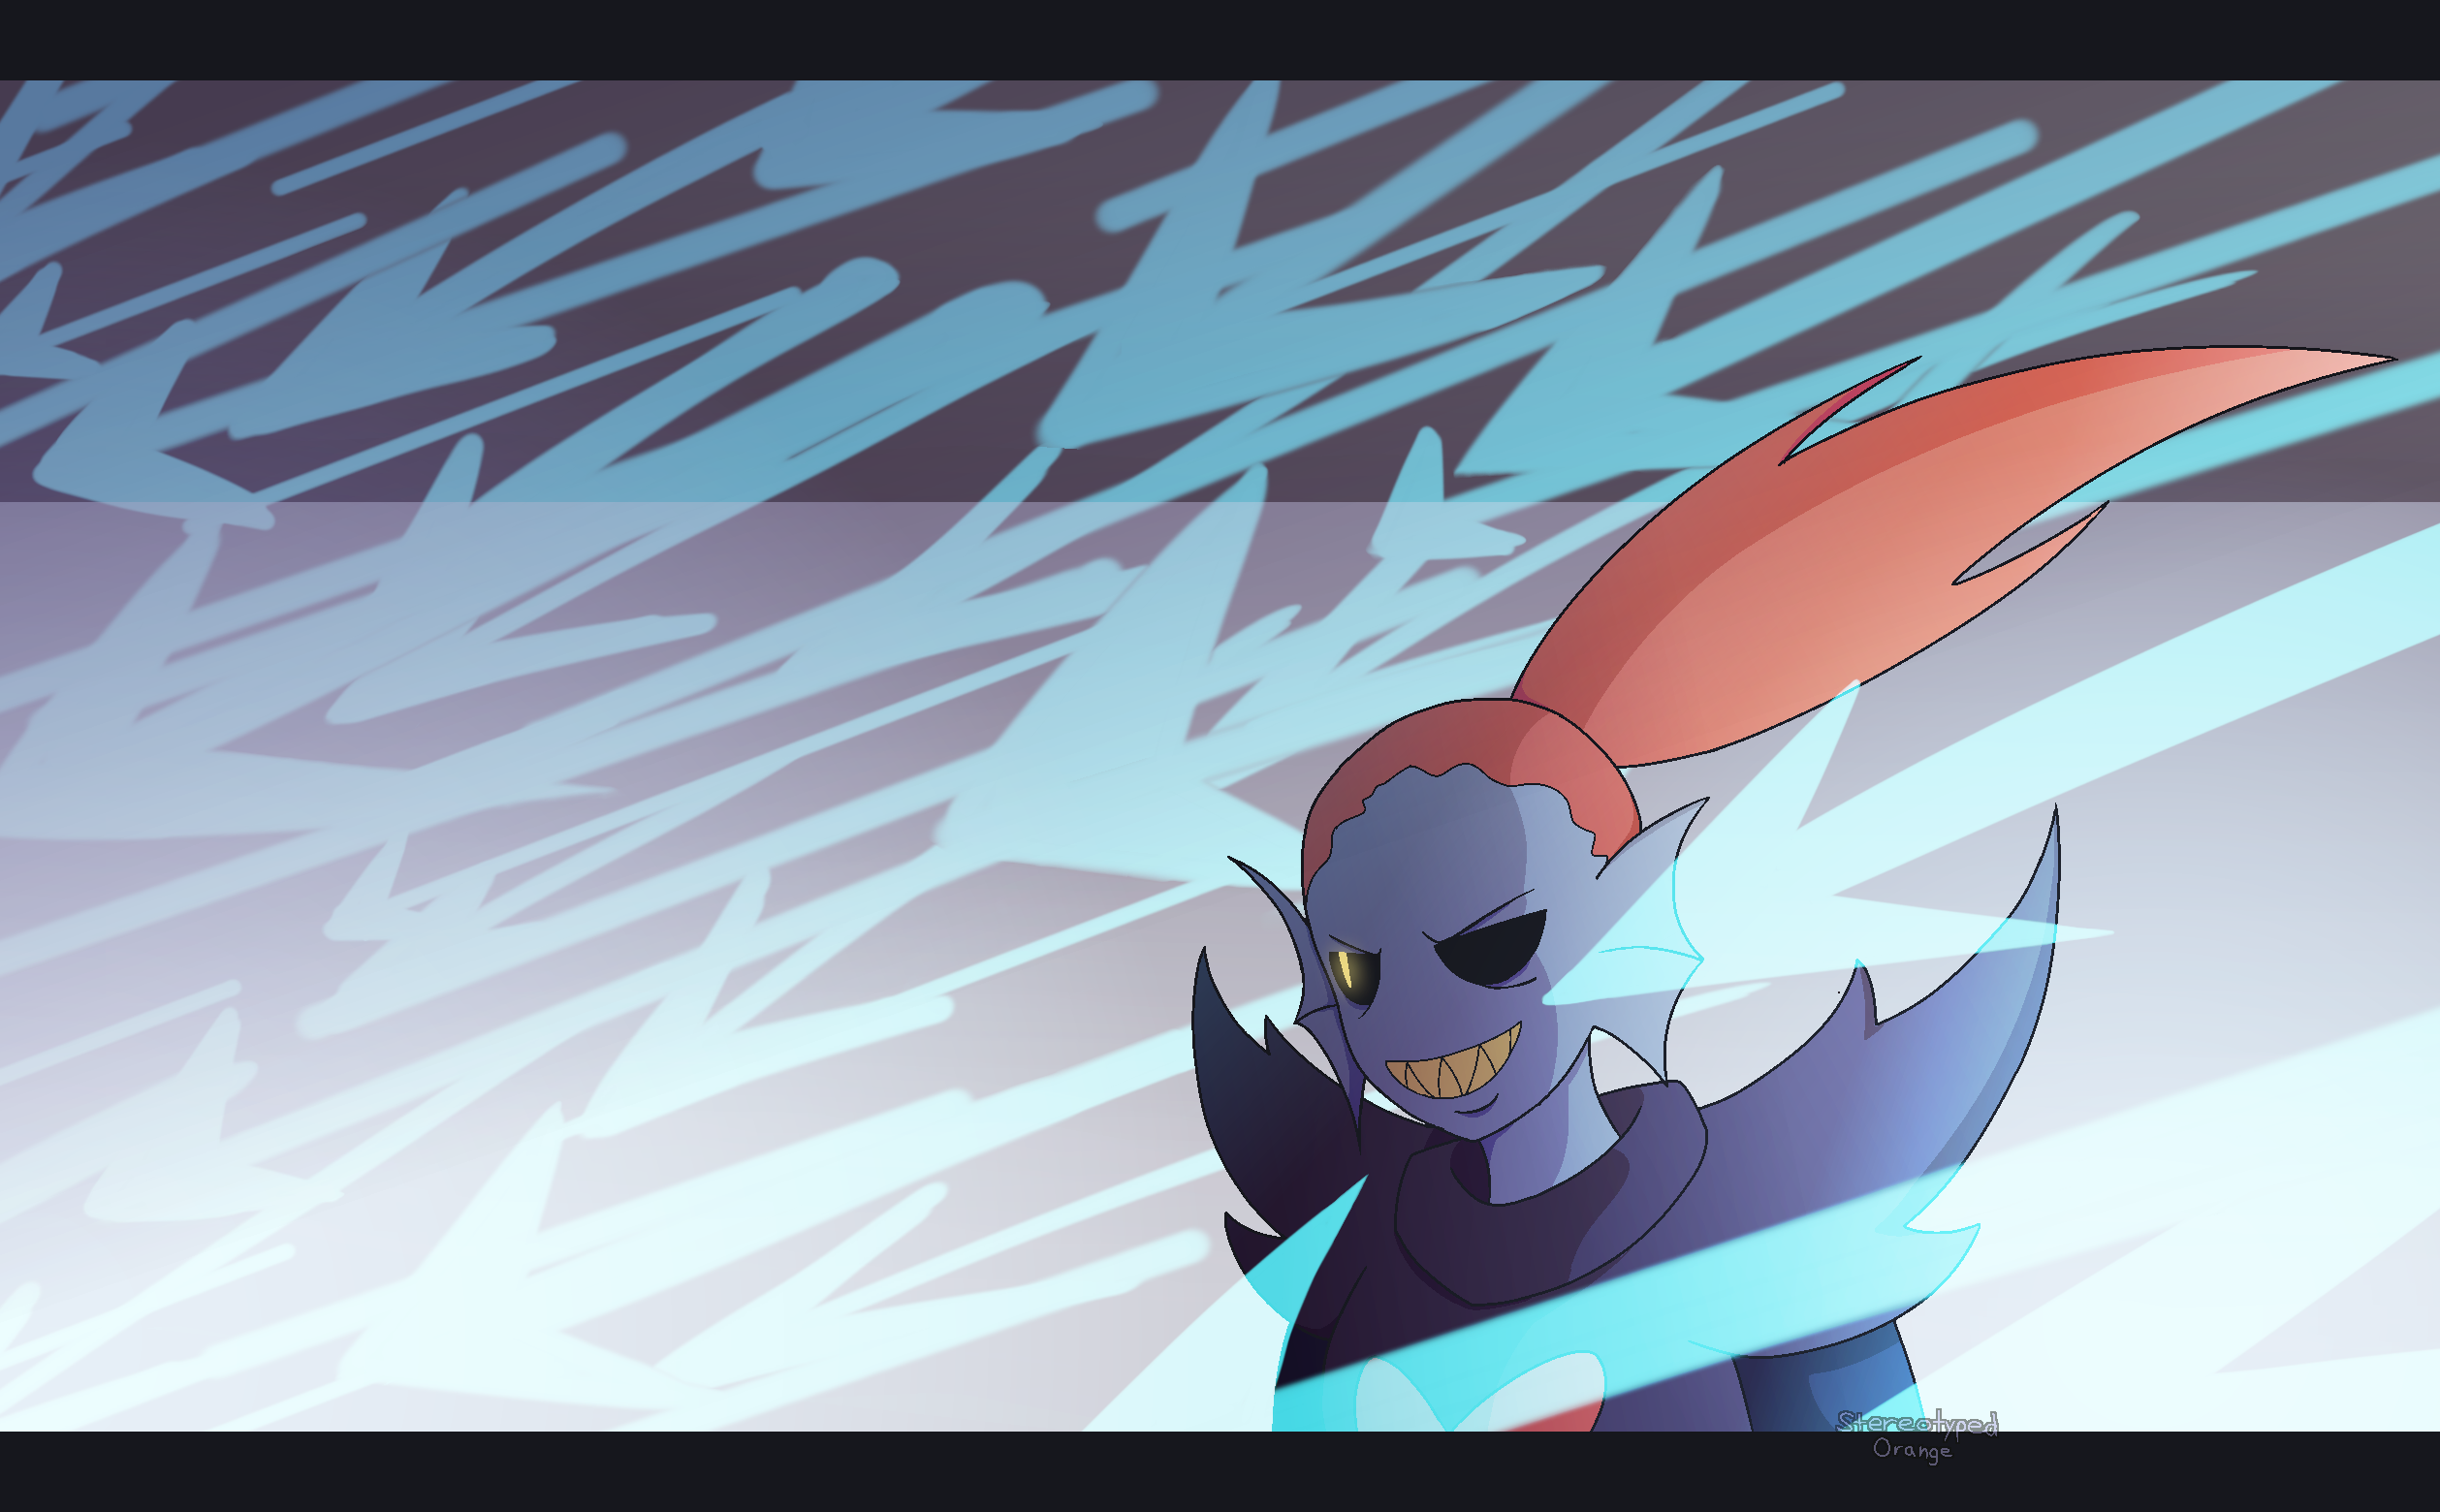 Undyne The Undying.. GlitchTale. Undertale AU.. By Stereotyped Orange. Undertale, Undertale Au, Anime